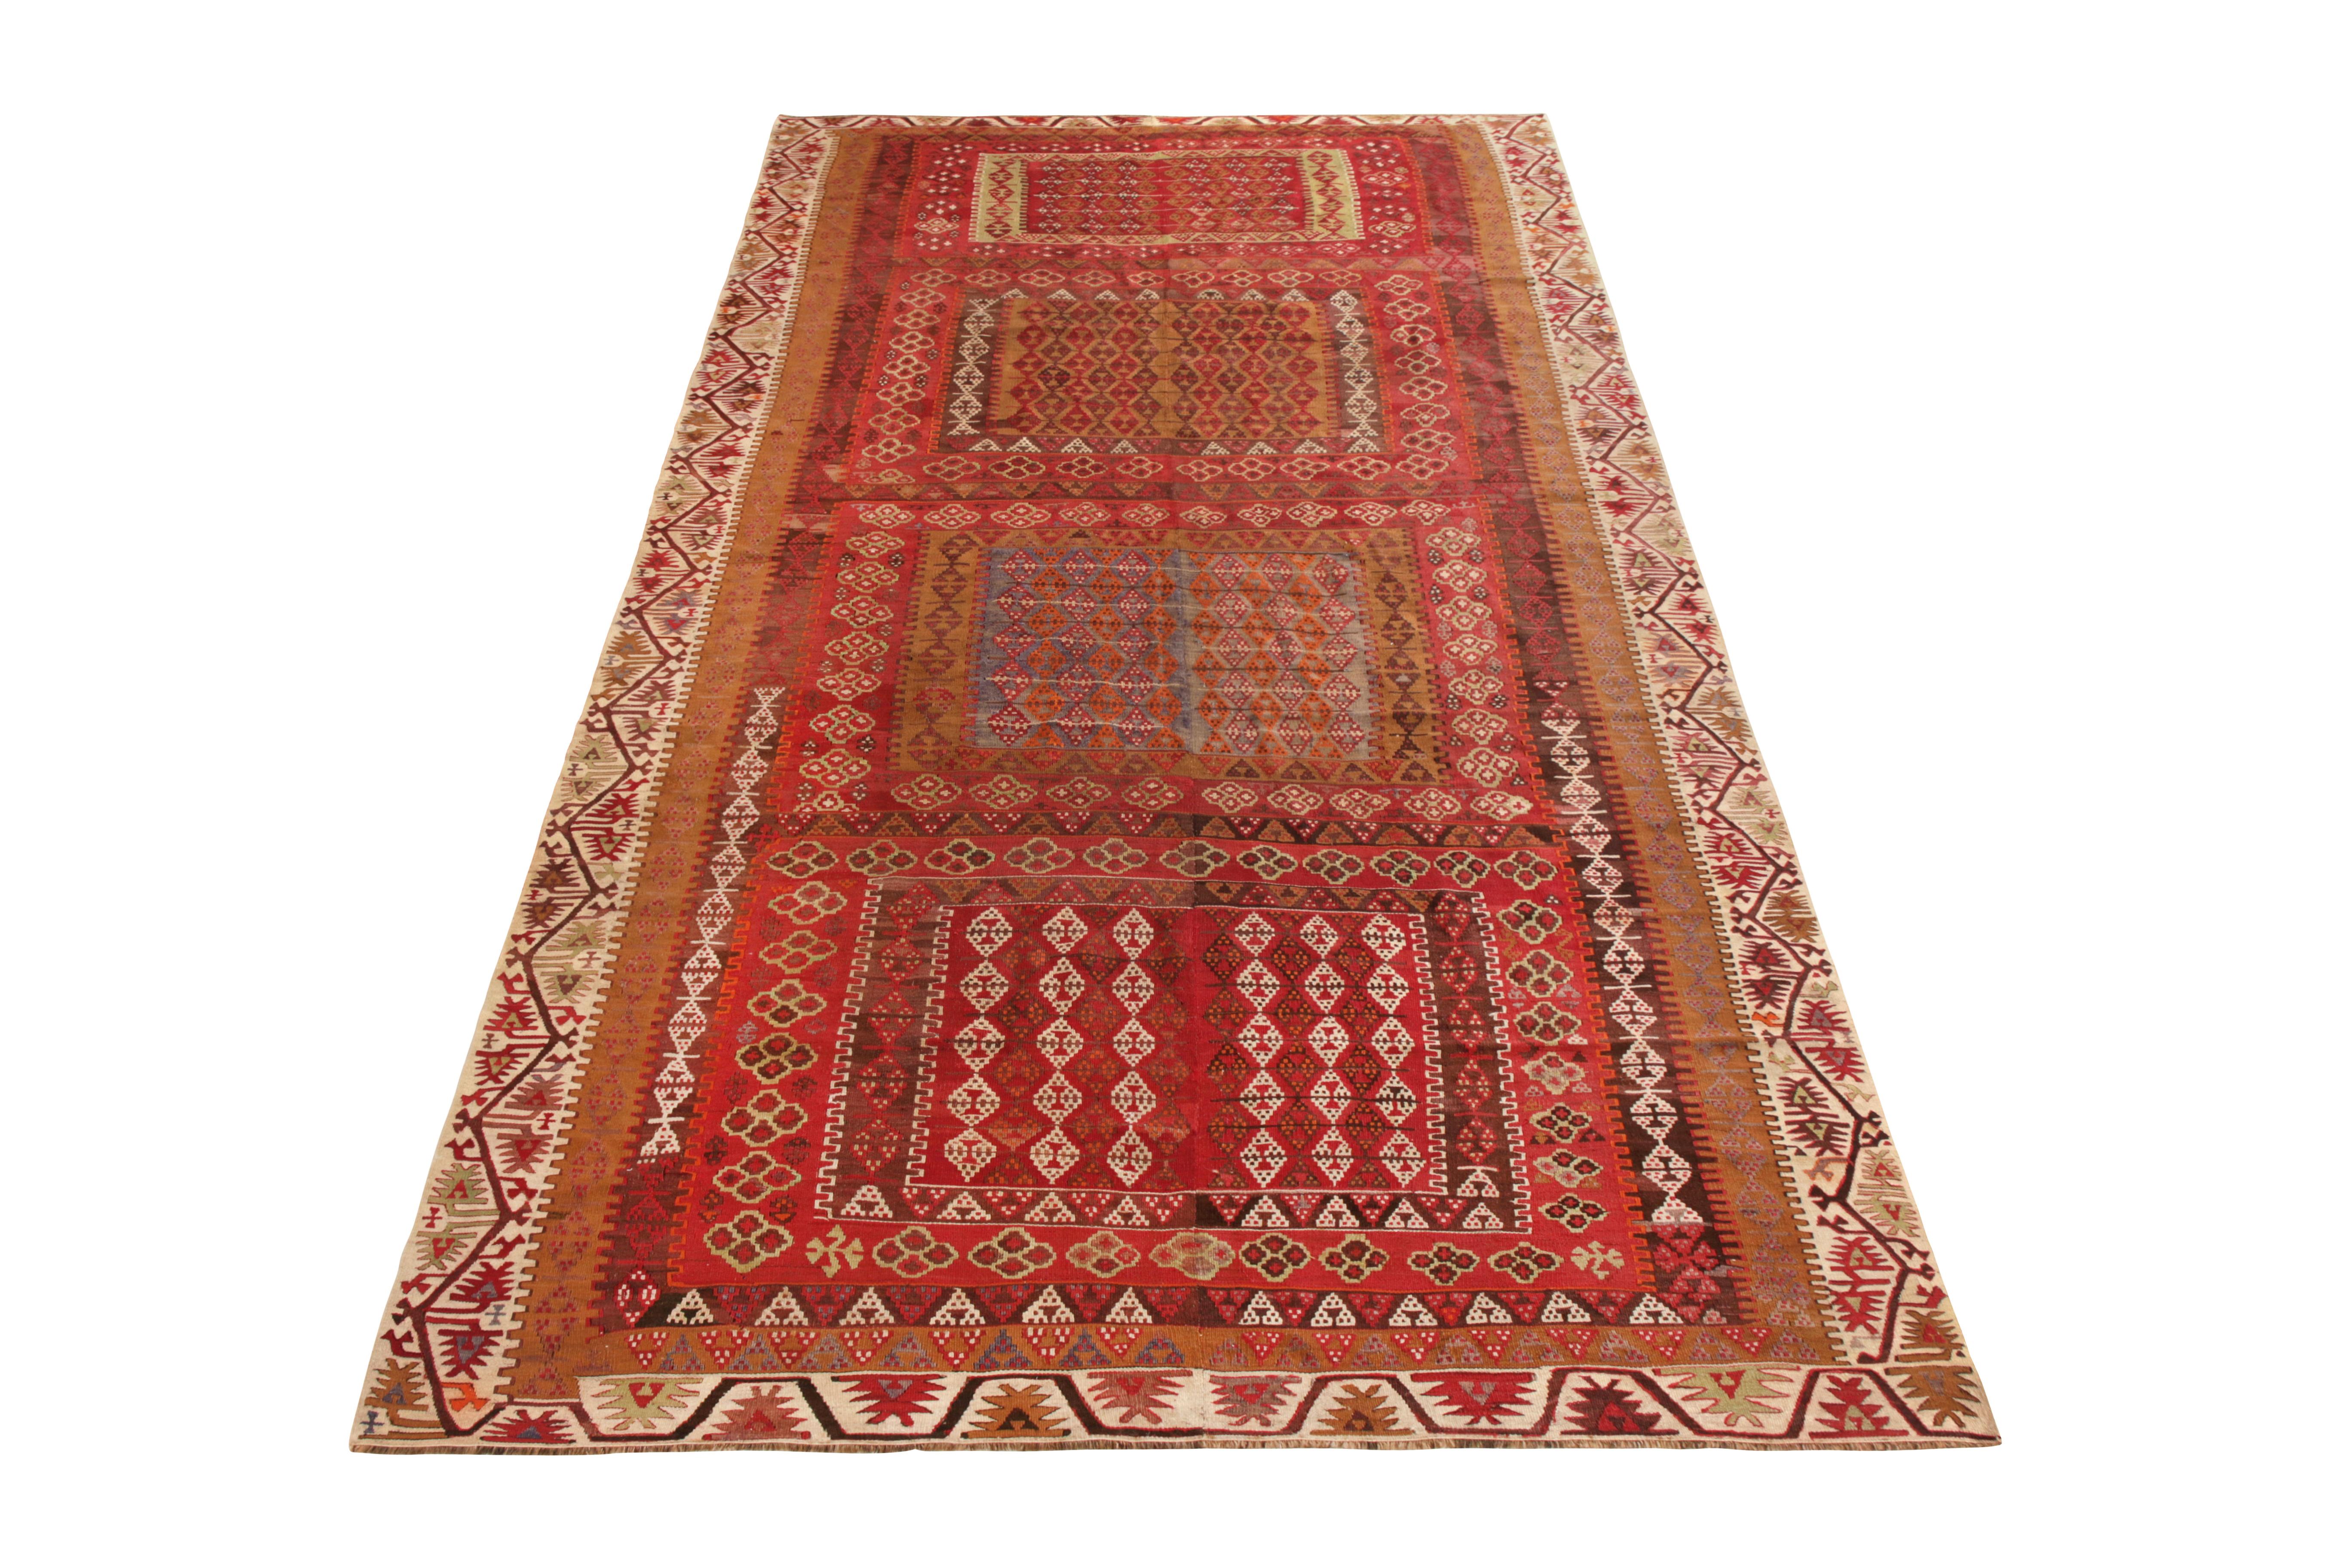 A revered Kayseri Kilim joining the vintage selections in Rug & celebrated Kilim & Flat Weave collection. Sized at 7x14, the geometric pattern flourishes to an exuberant scale, exemplifying this Turkish Kilim style from the 1950s-1960s period.